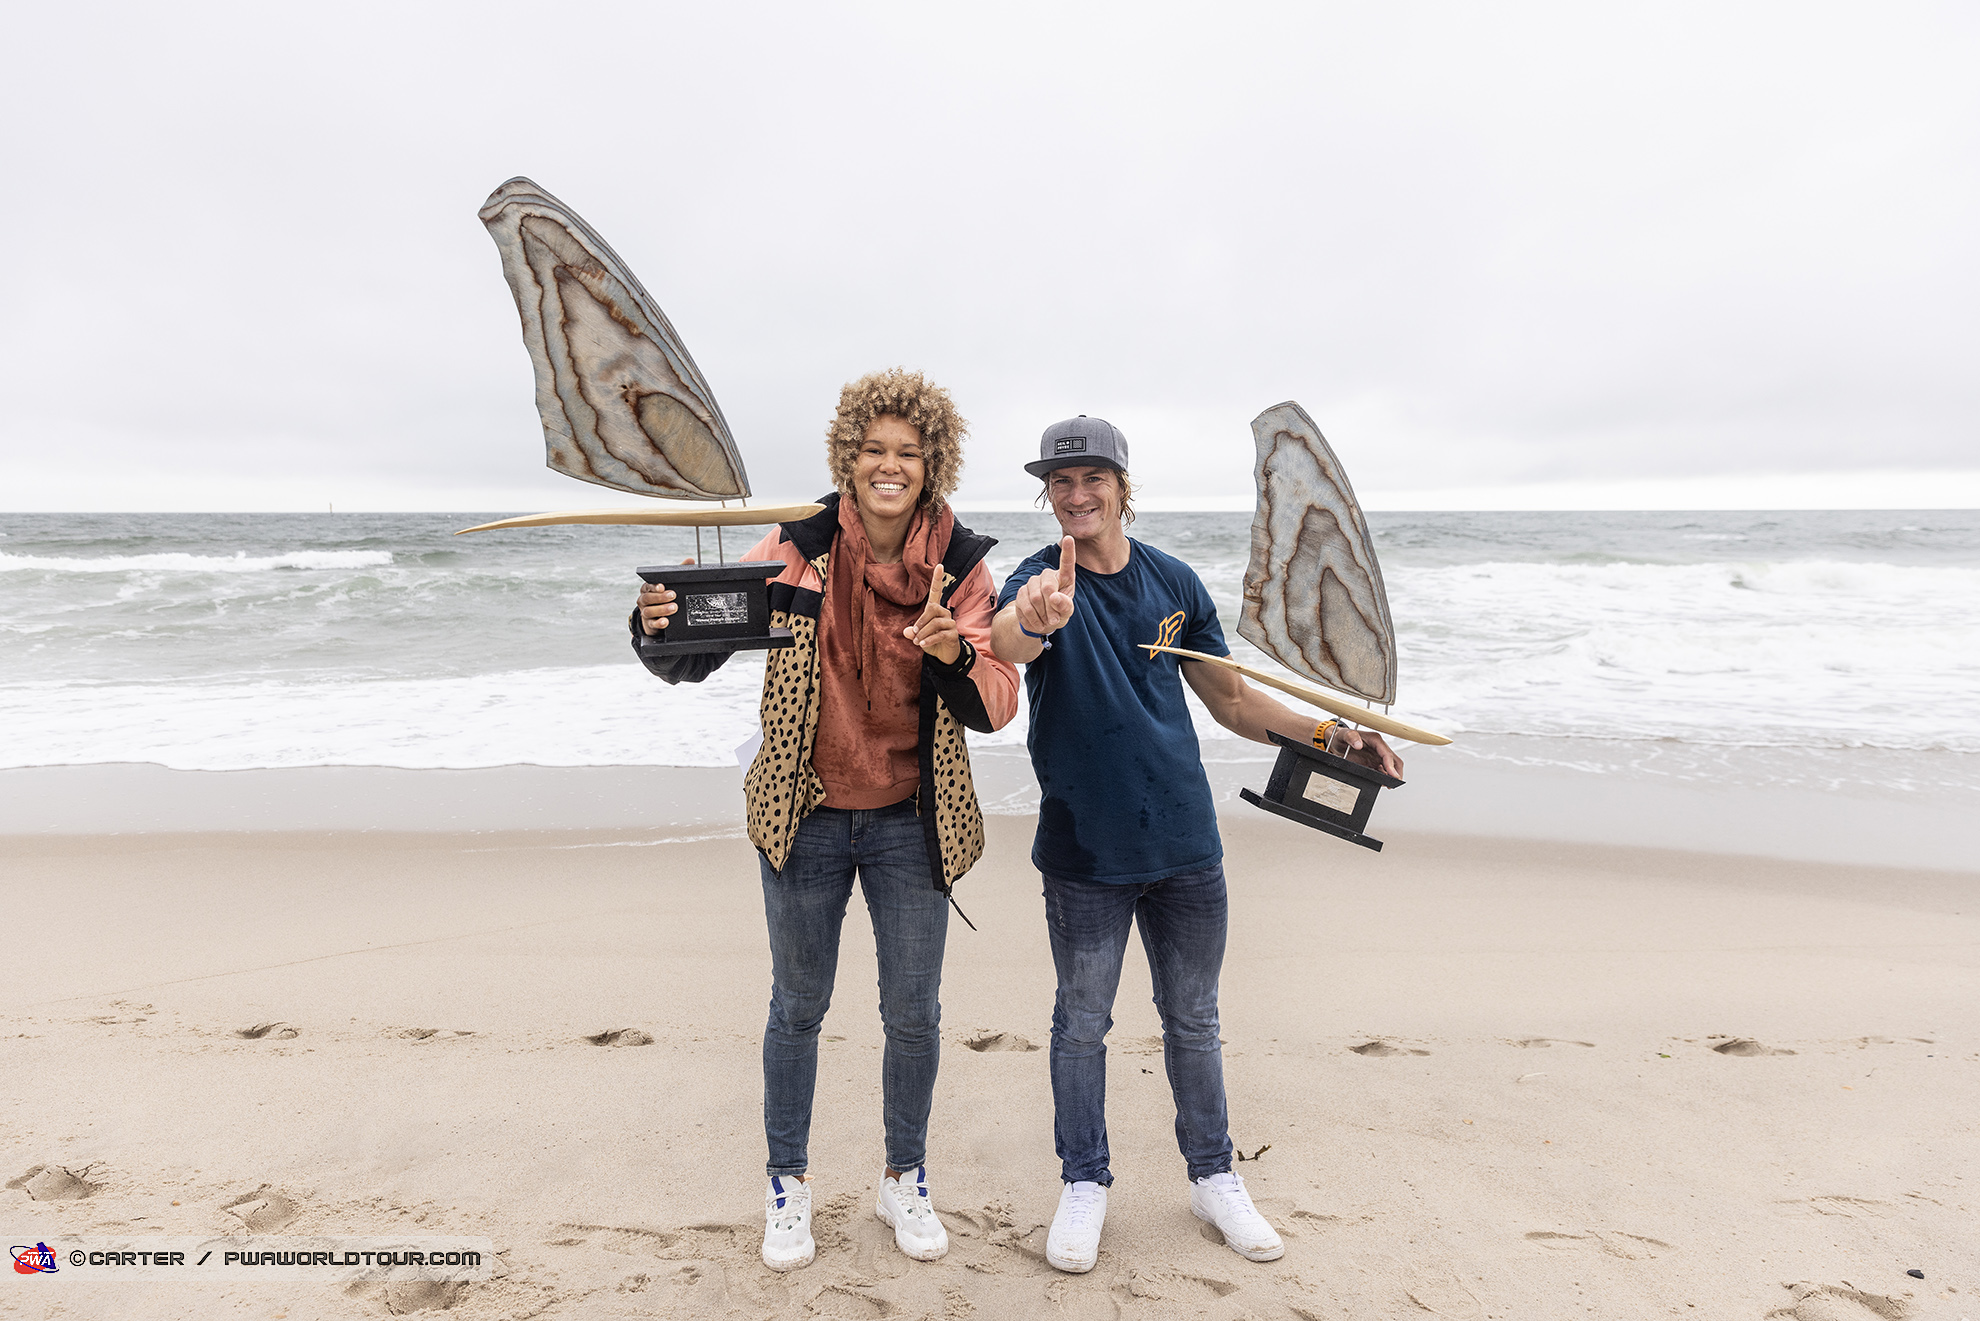 Yentel and Sarah-Quita posing with their world title trophies in Sylt